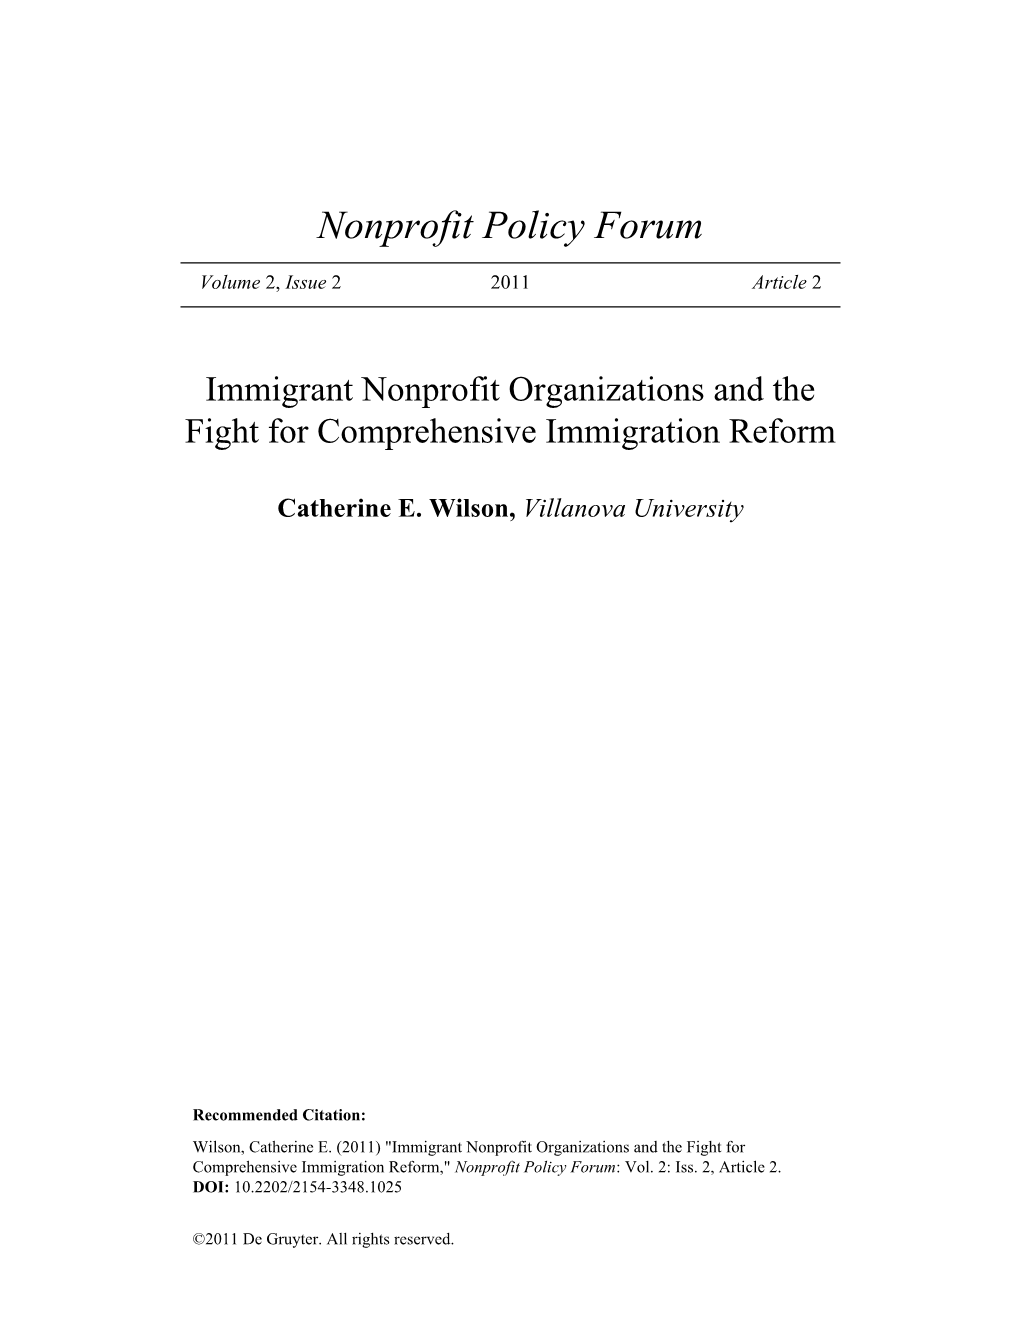 Immigrant Nonprofit Organizations and the Fight for Comprehensive Immigration Reform